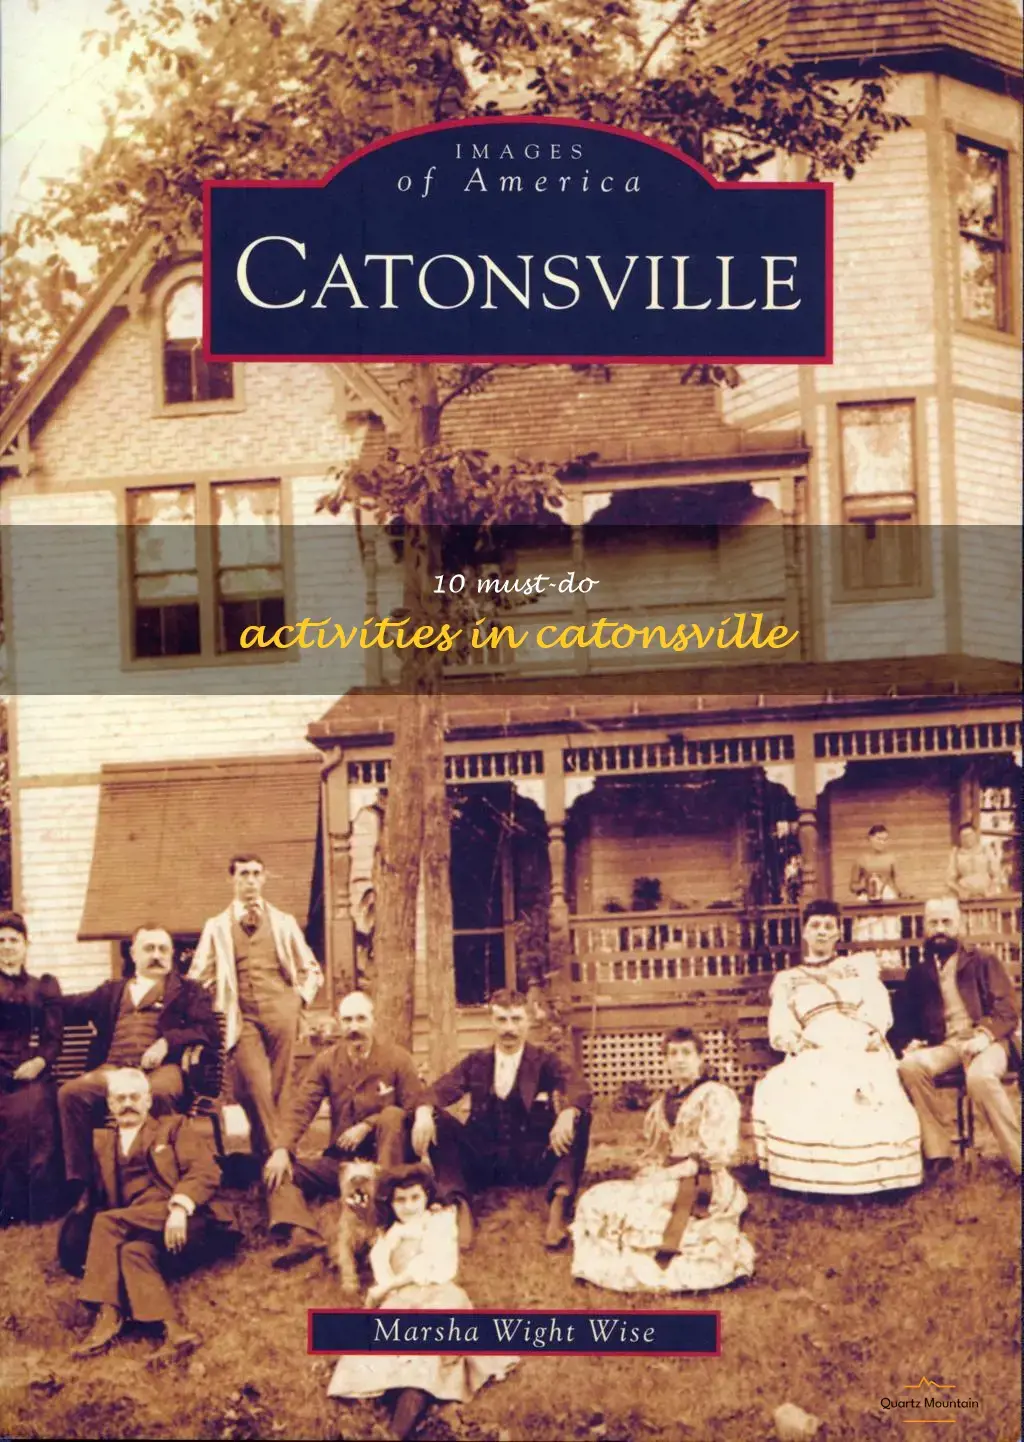 things to do in catonsville